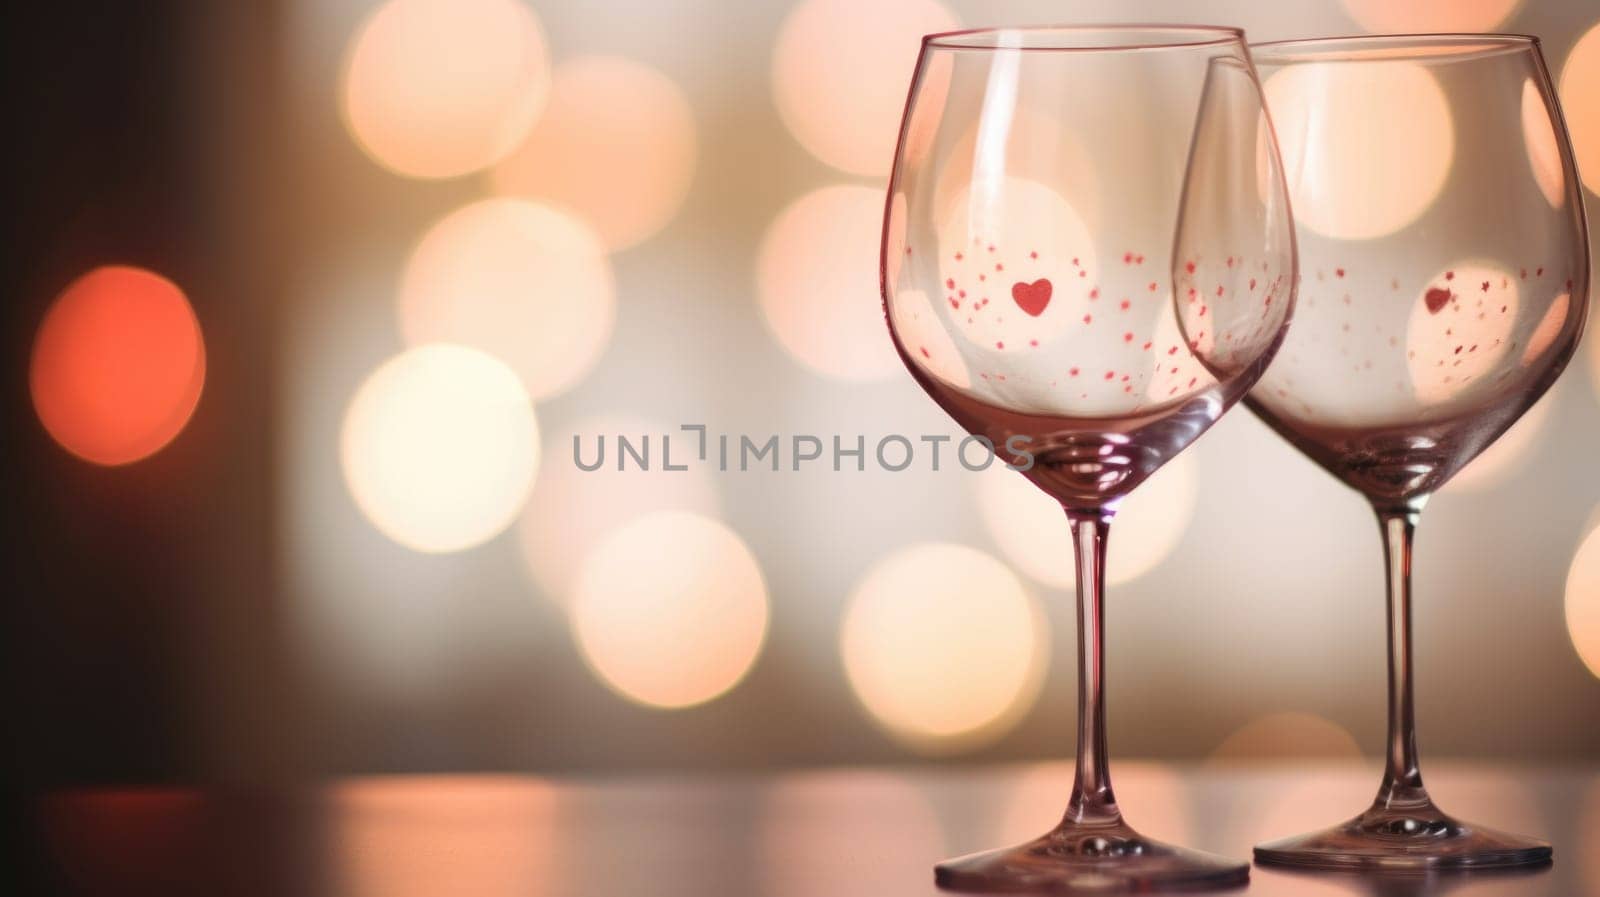 Two wine glasses with hearts on them, AI by starush